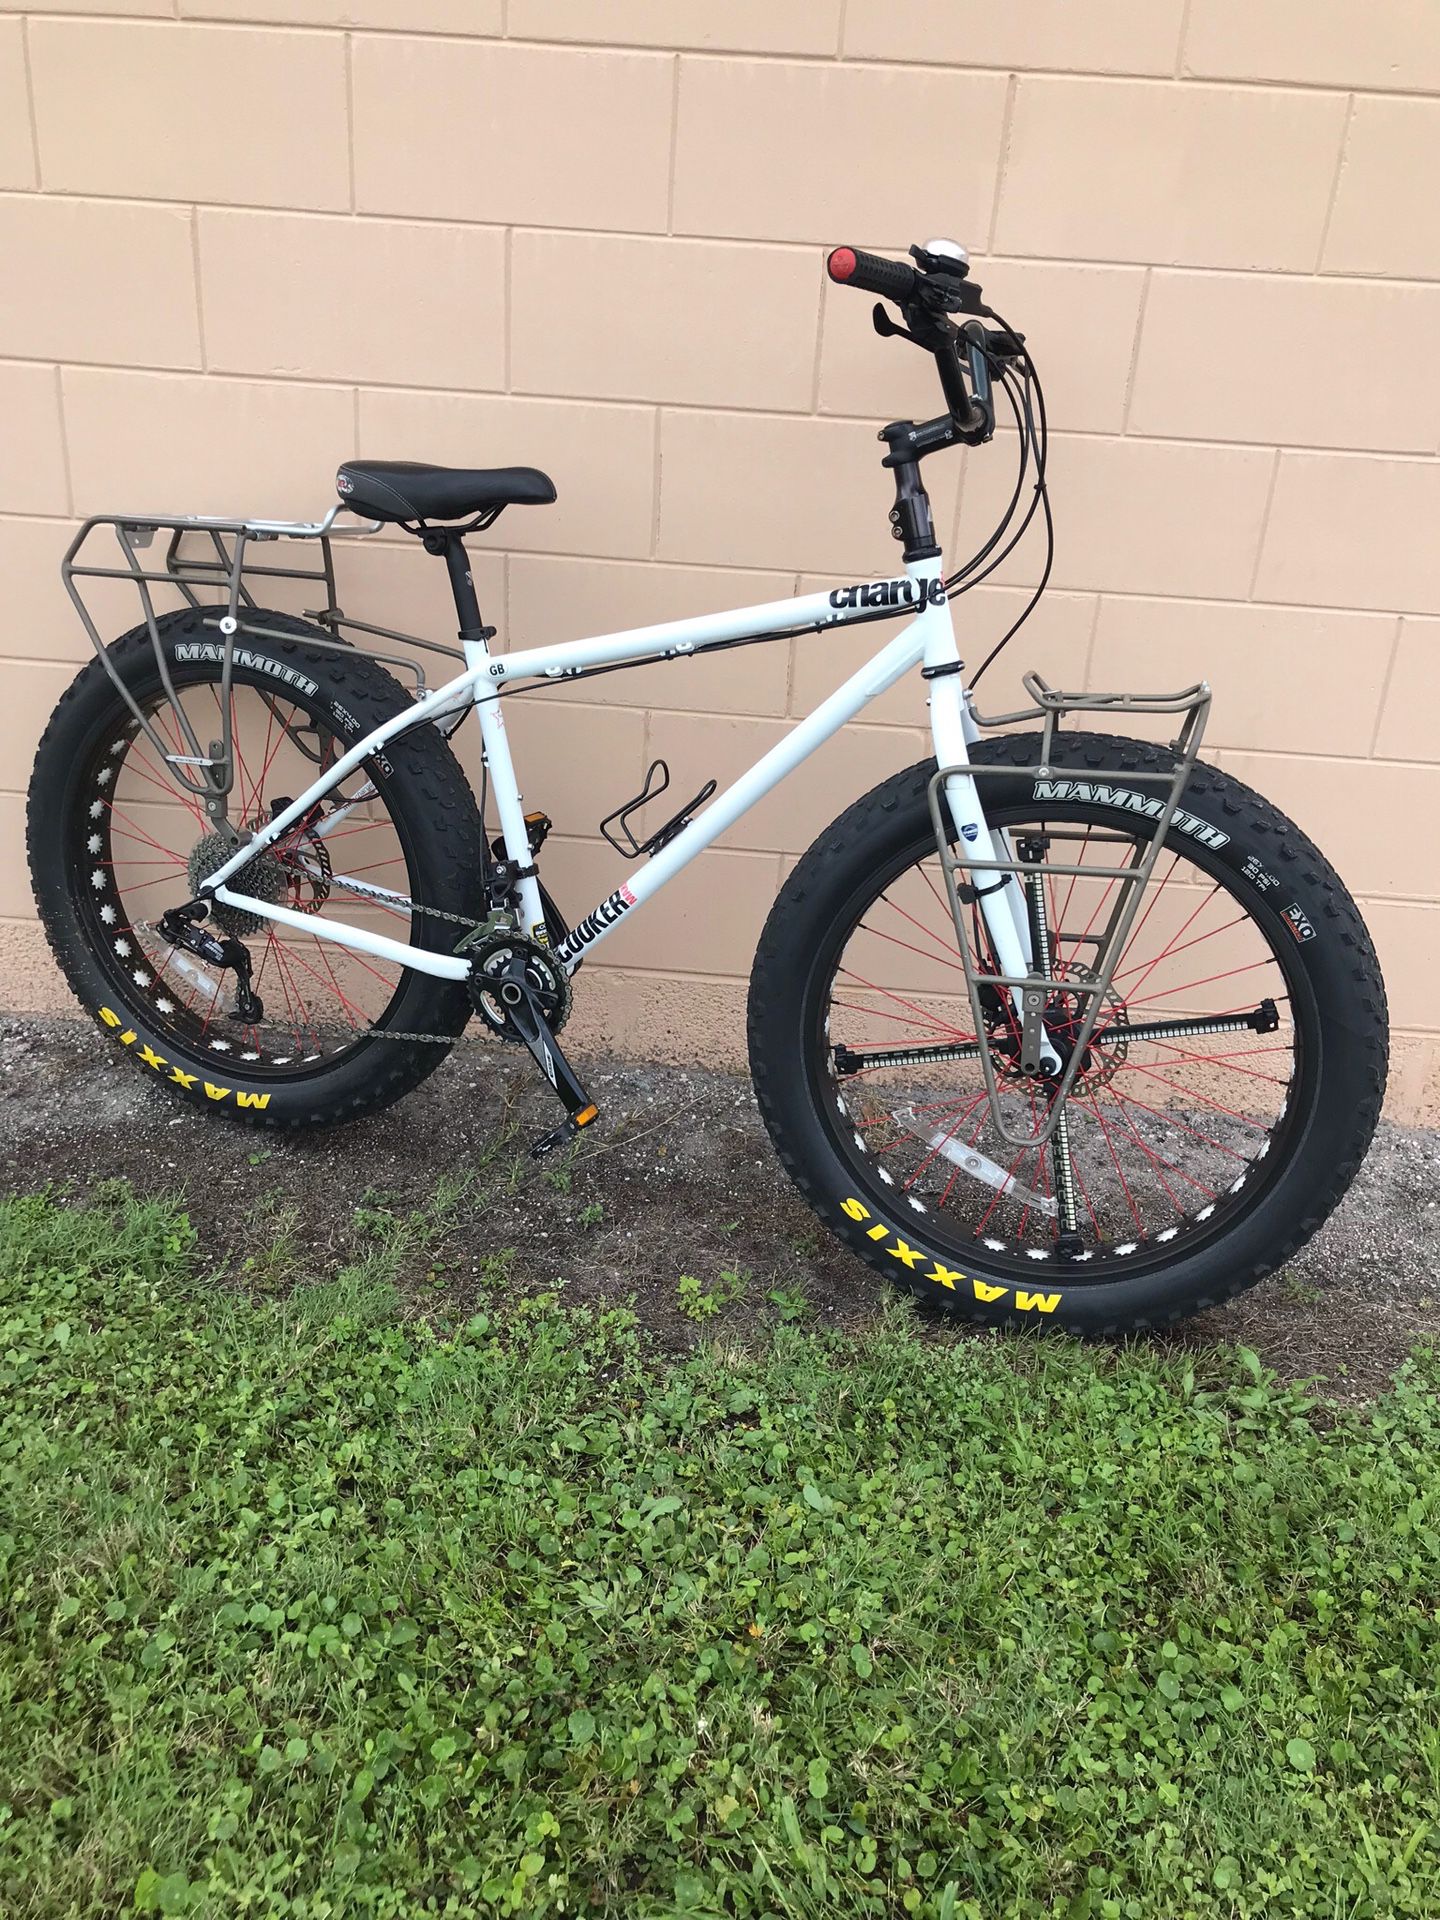 Charge maxi 2 fat tire bike. (Subsidiary of cannondale bikes) great condition. Many extras.